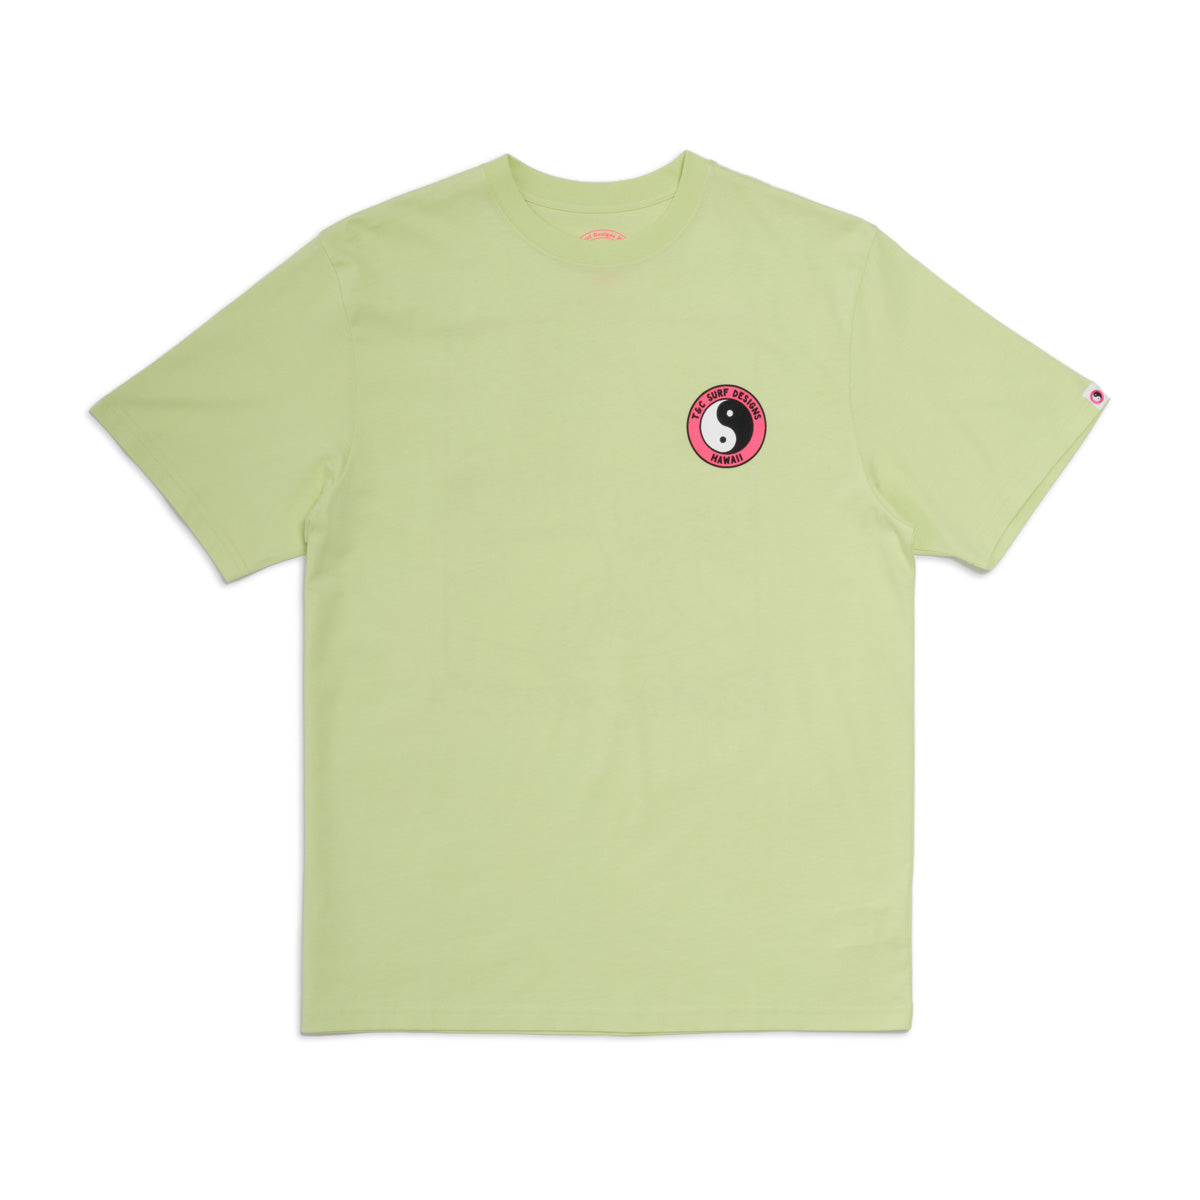 Gnar Gull S/S Tee - Washed Lime